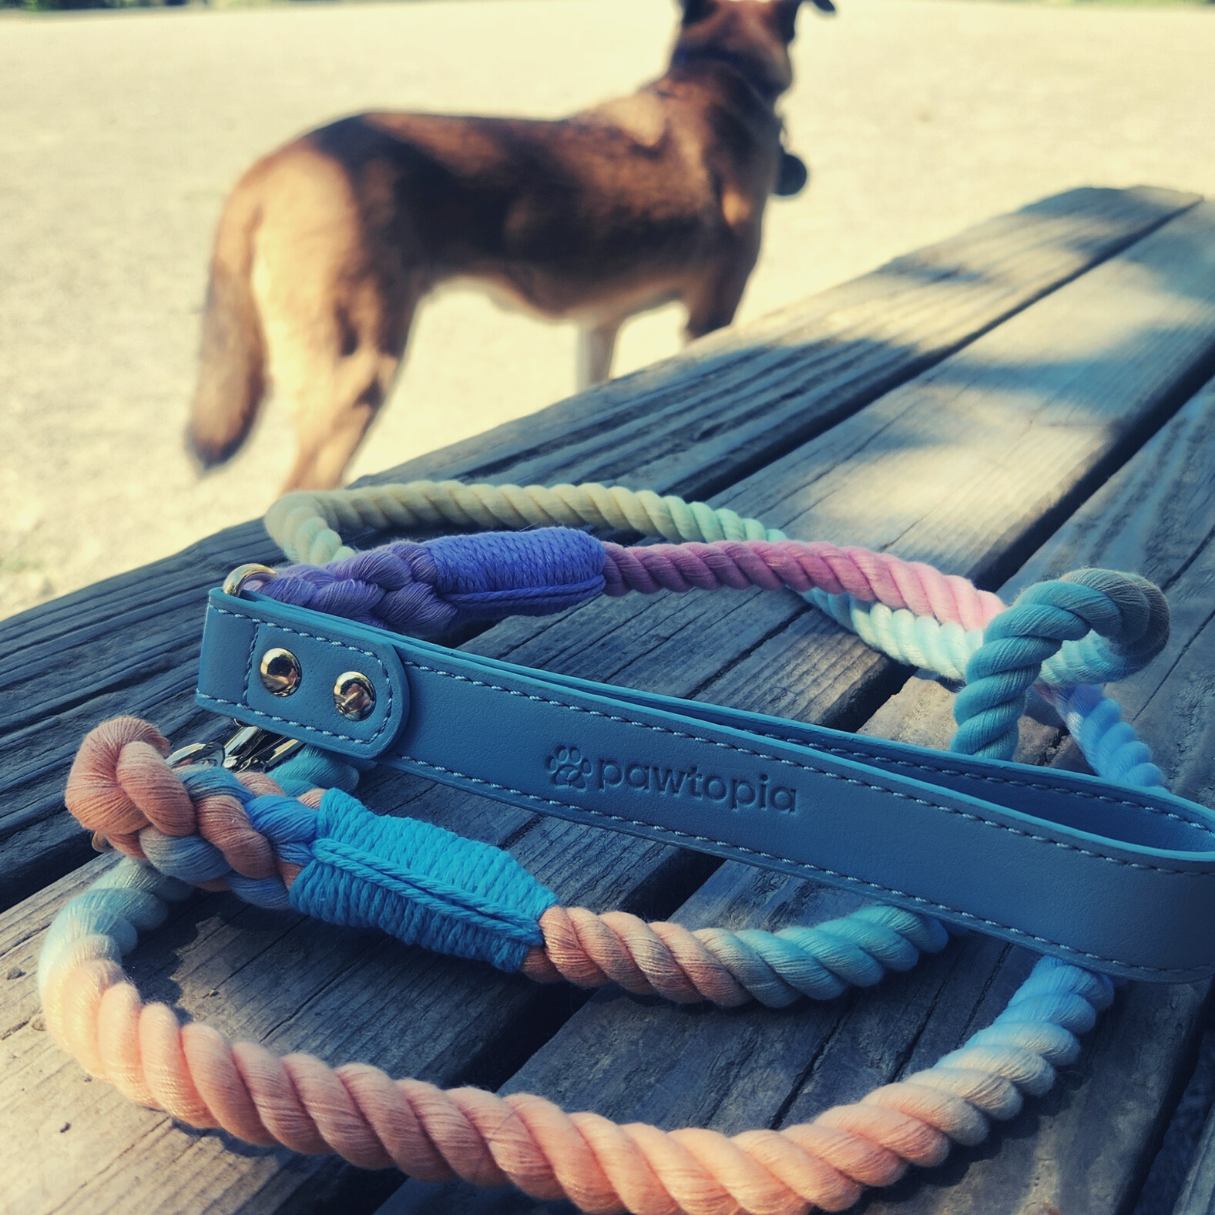 5 FT Dog Leash & Collar Set for Small Dogs, Cotton Braided Rope with Vegan Leather Handle (Light Blue, Small)